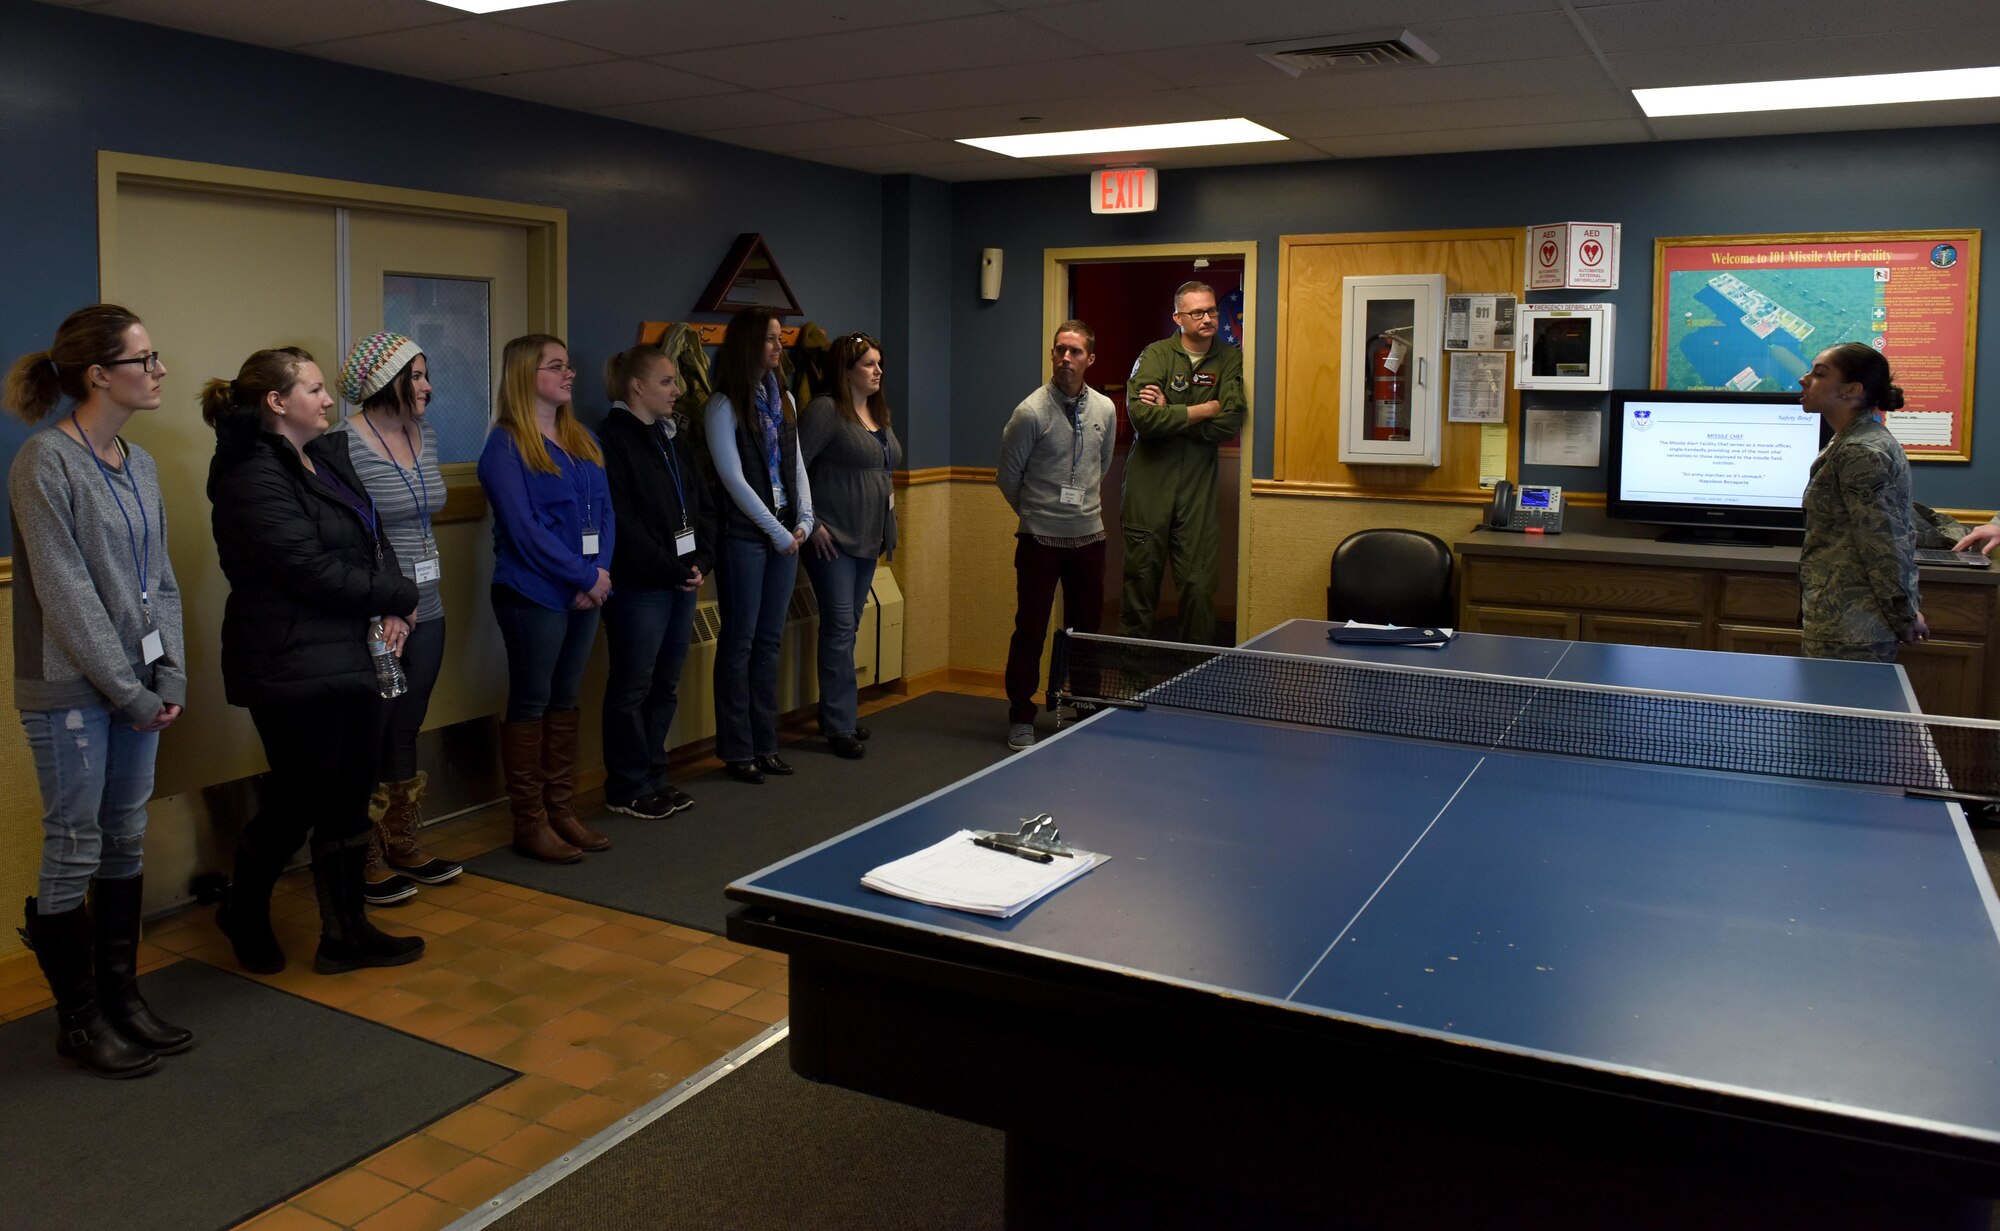 Airman 1st Class Seande Goodhue, far right, 341st Force Support Squadron missile chef, briefs spouses during a tour at a missile alert facility Oct. 14, 2017, at Malmstrom Air Force Base, Mont. During the tour, spouses received a mission brief, toured the missile procedures trainer and finished with a visit to a missile alert facility in the missile field. (U.S. Air Force photo/Tech. Sgt. Caleb Pierce)